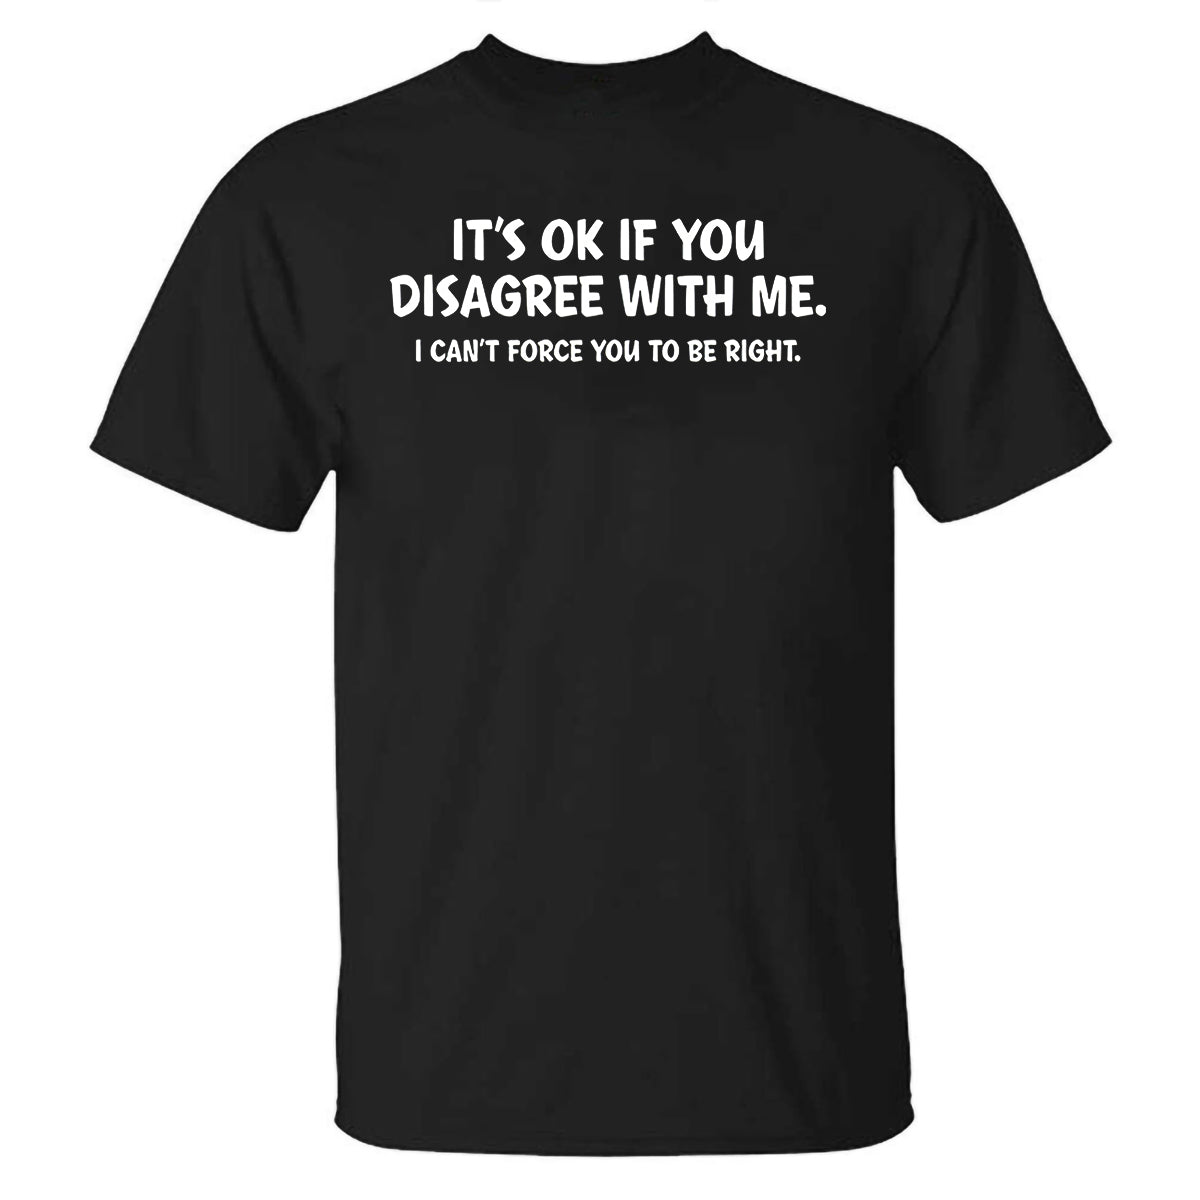 It's Ok If You Disagree With Me Printed T-shirt